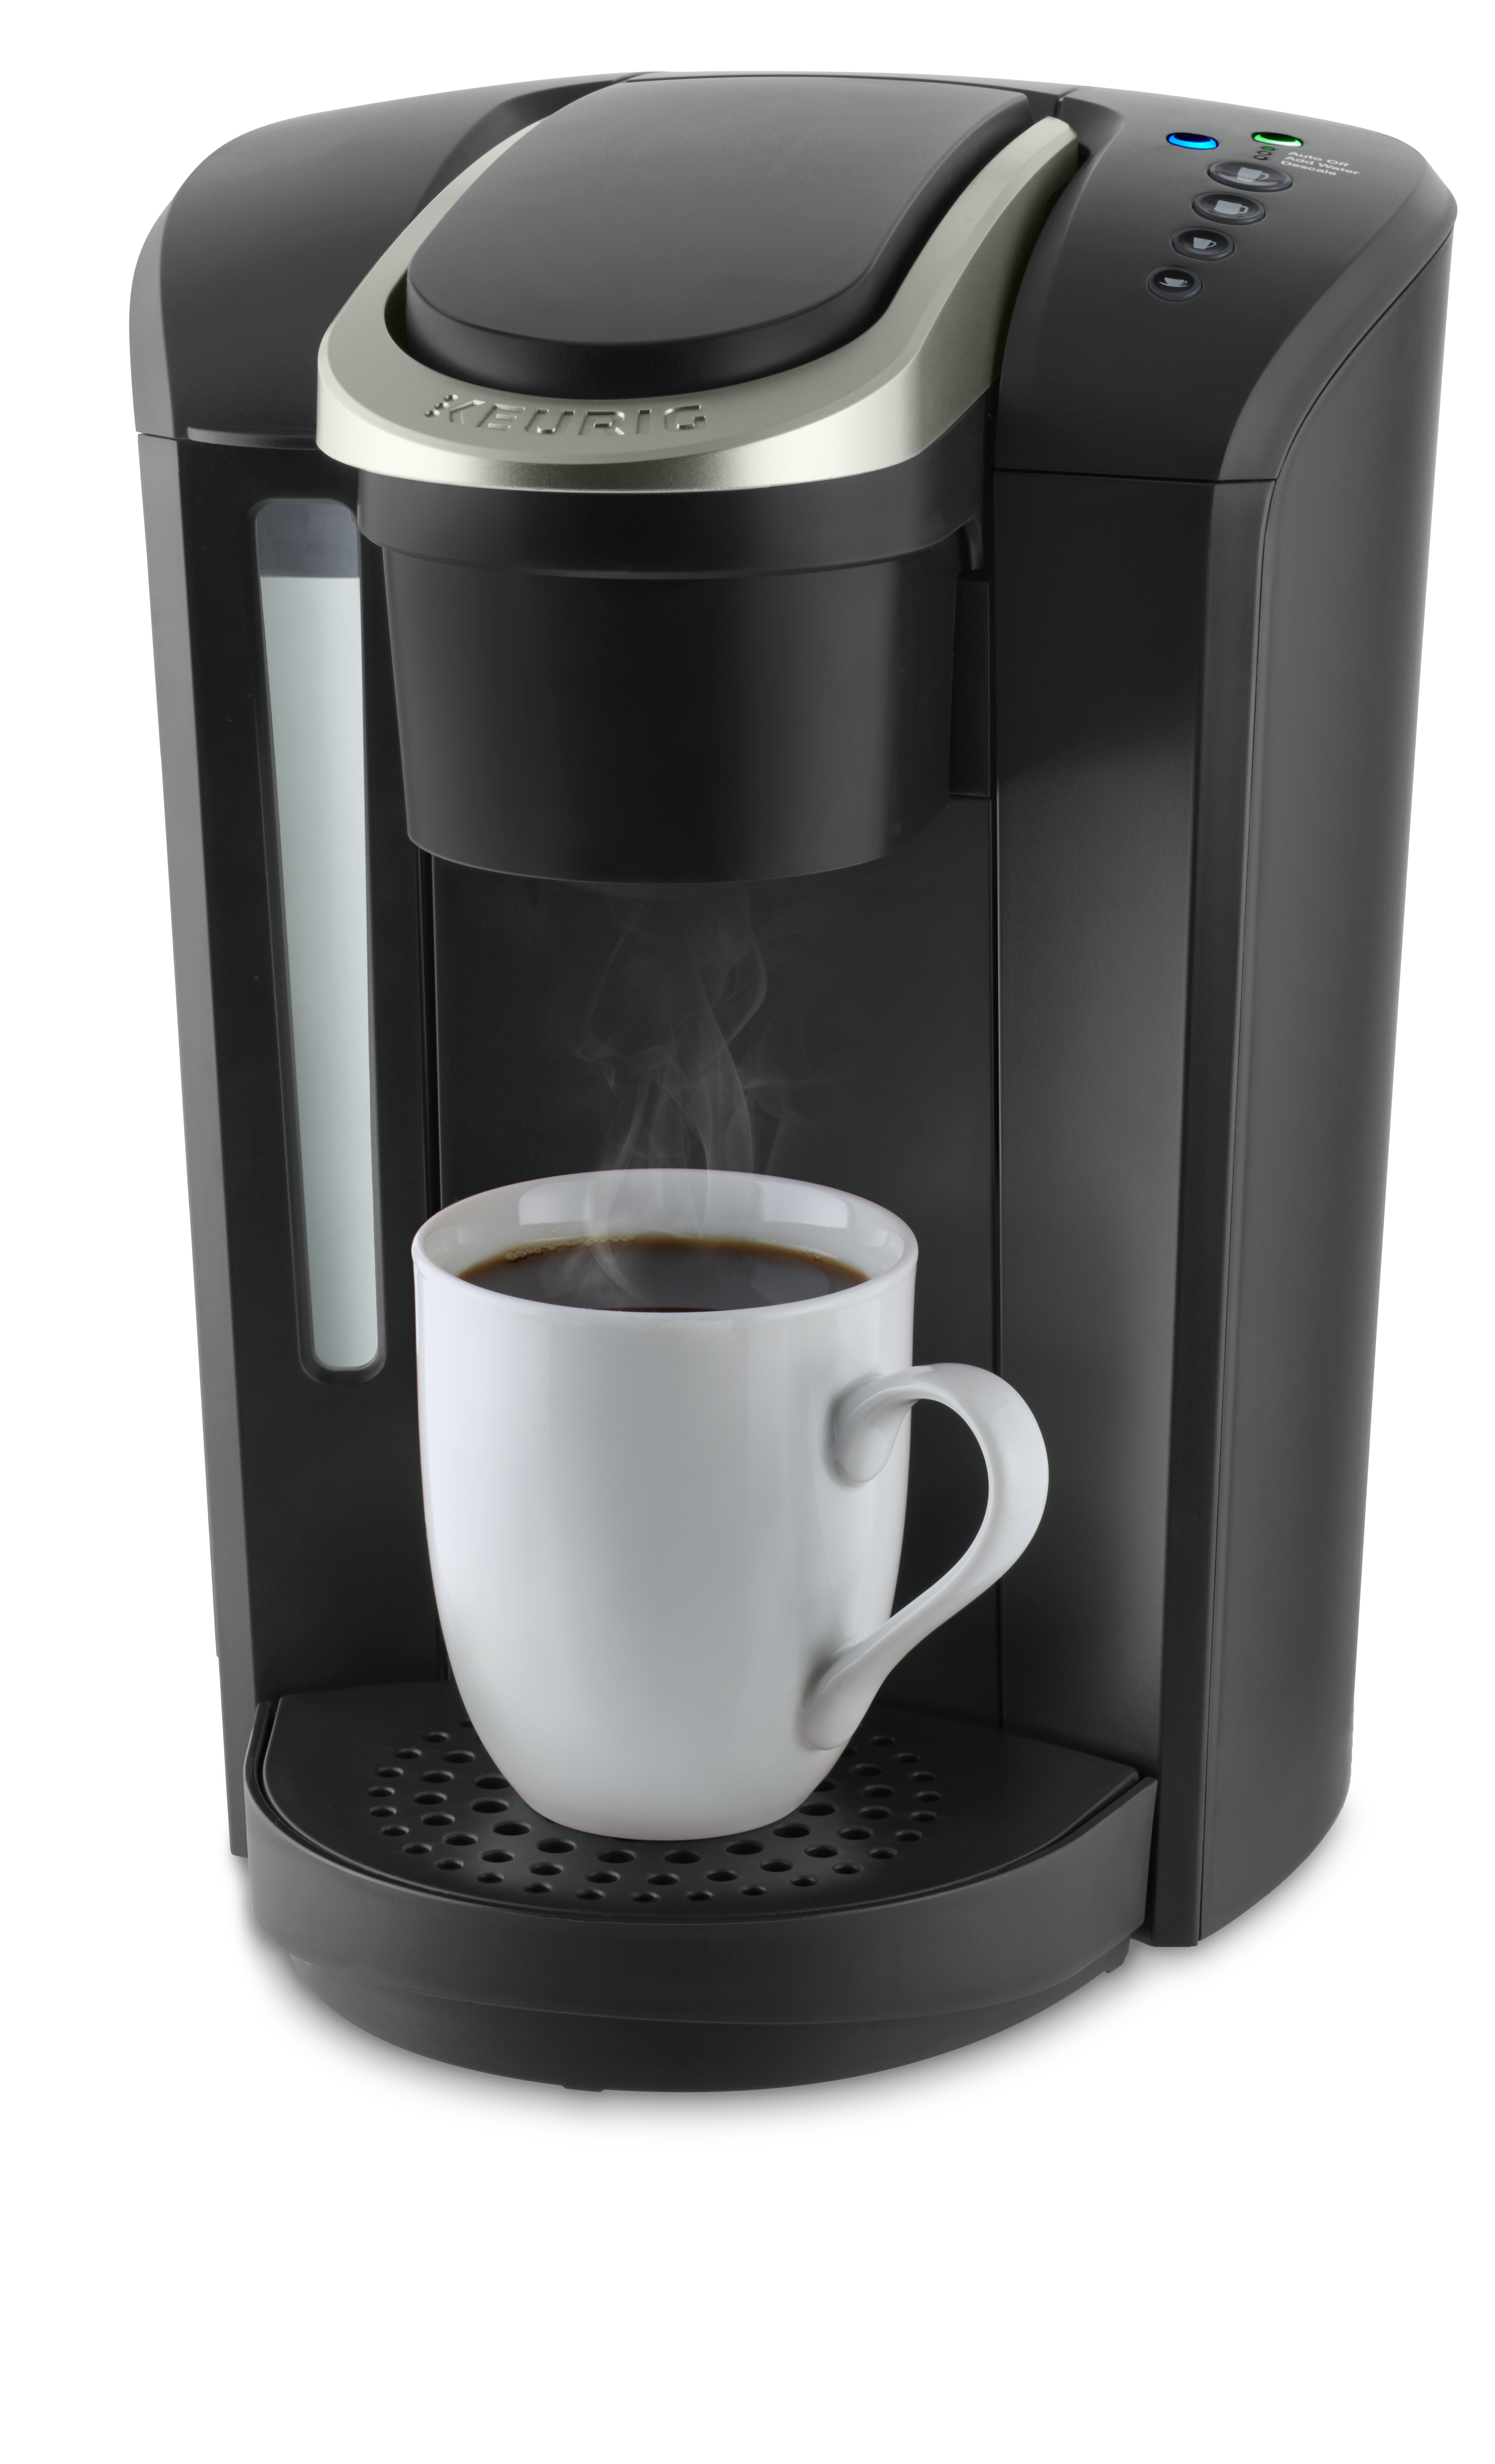 Keurig Makes A Strong Move With Bold New Coffee Maker Business Wire